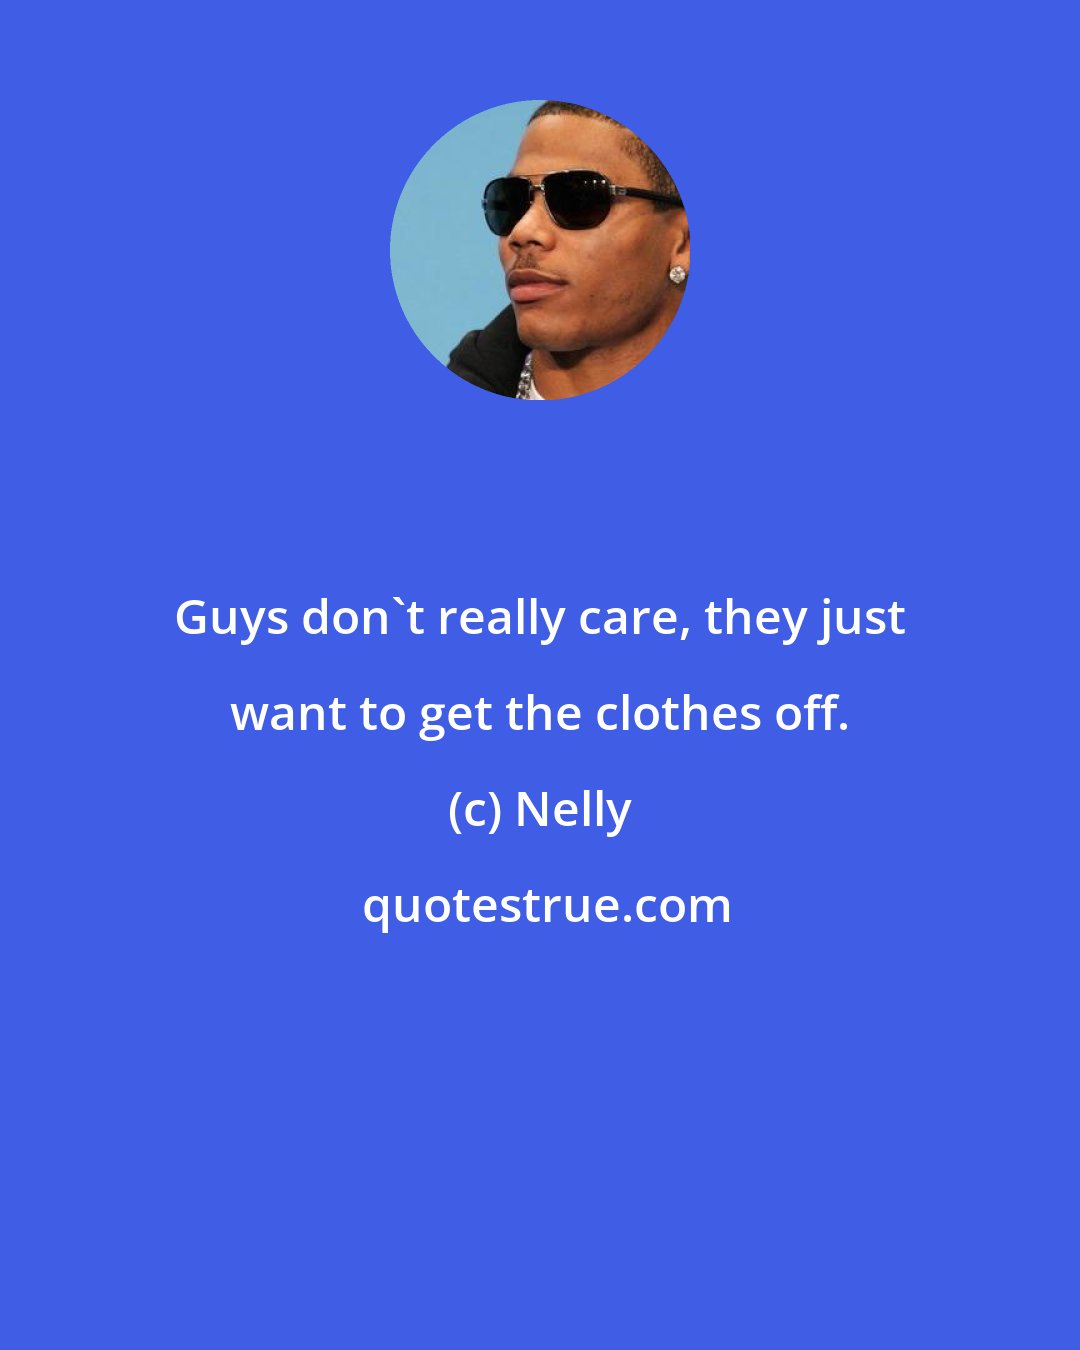 Nelly: Guys don't really care, they just want to get the clothes off.